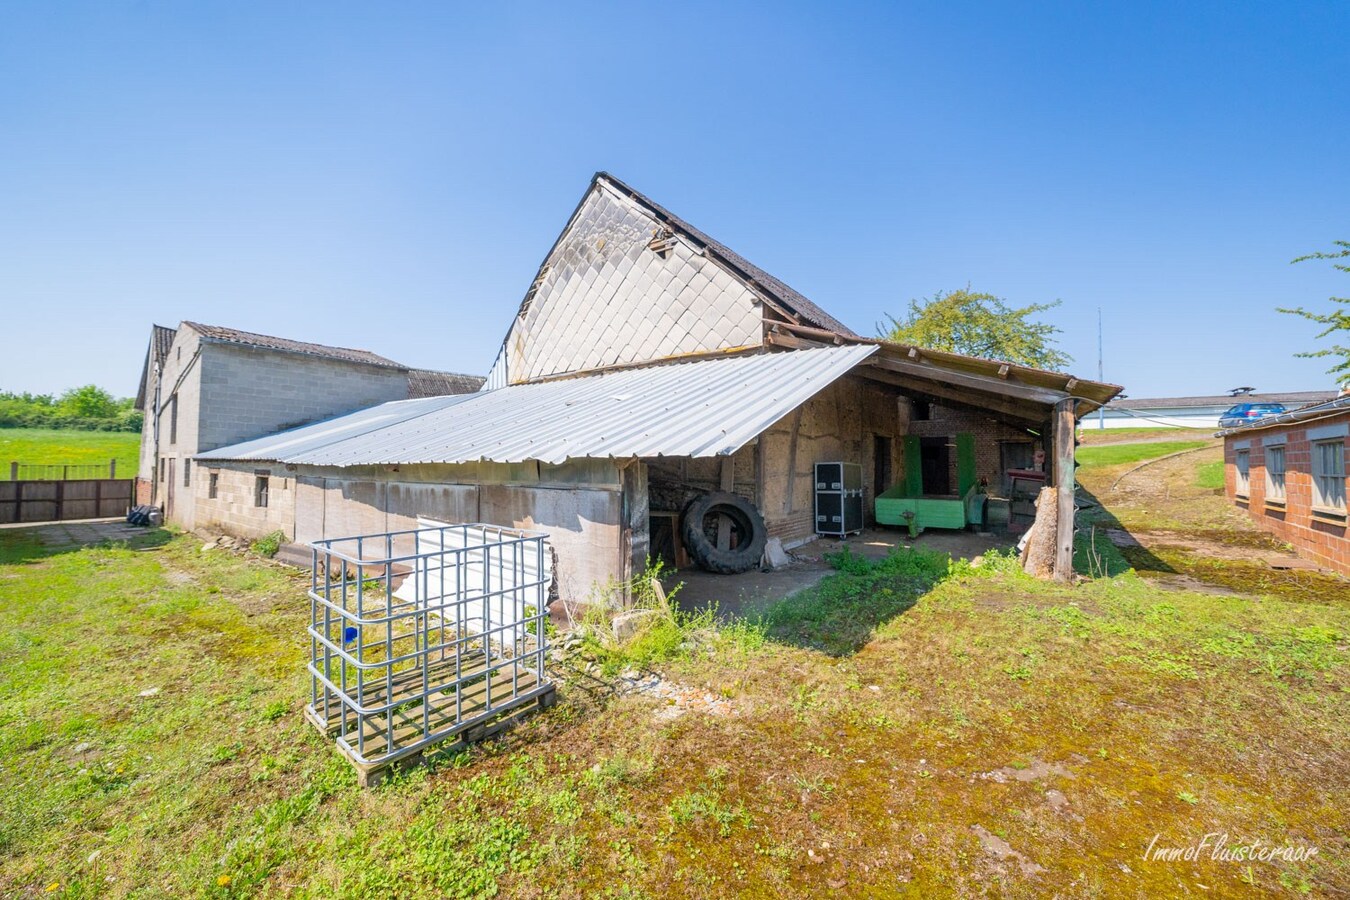 To be renovated square farm on approximately 60 acres in Borlo (Gingelom) 